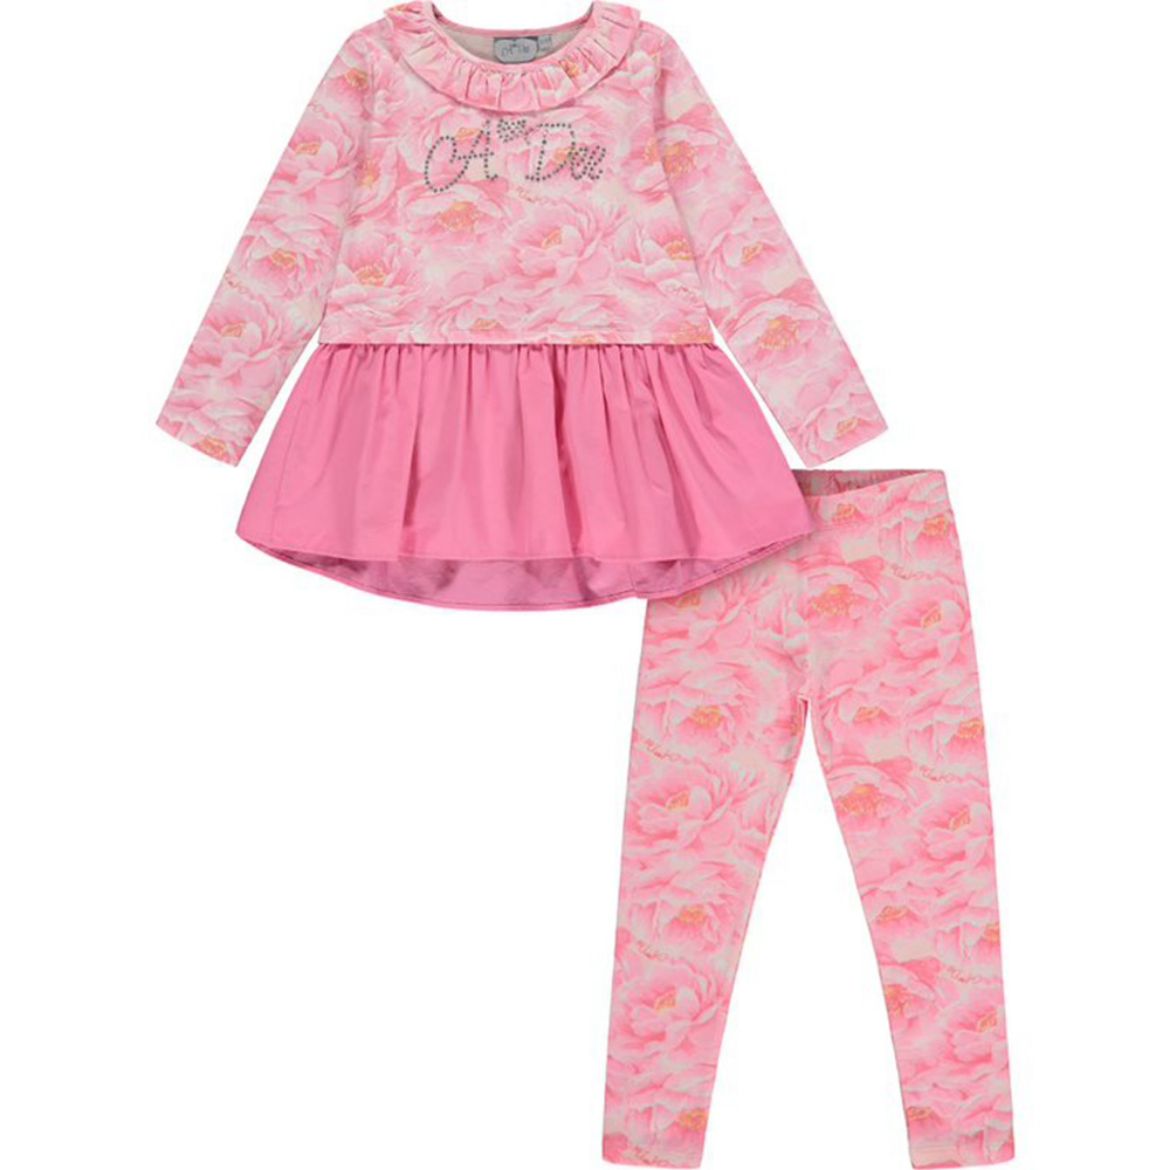 Picture of A Dee Girls Addison Pink Printed Legging Set